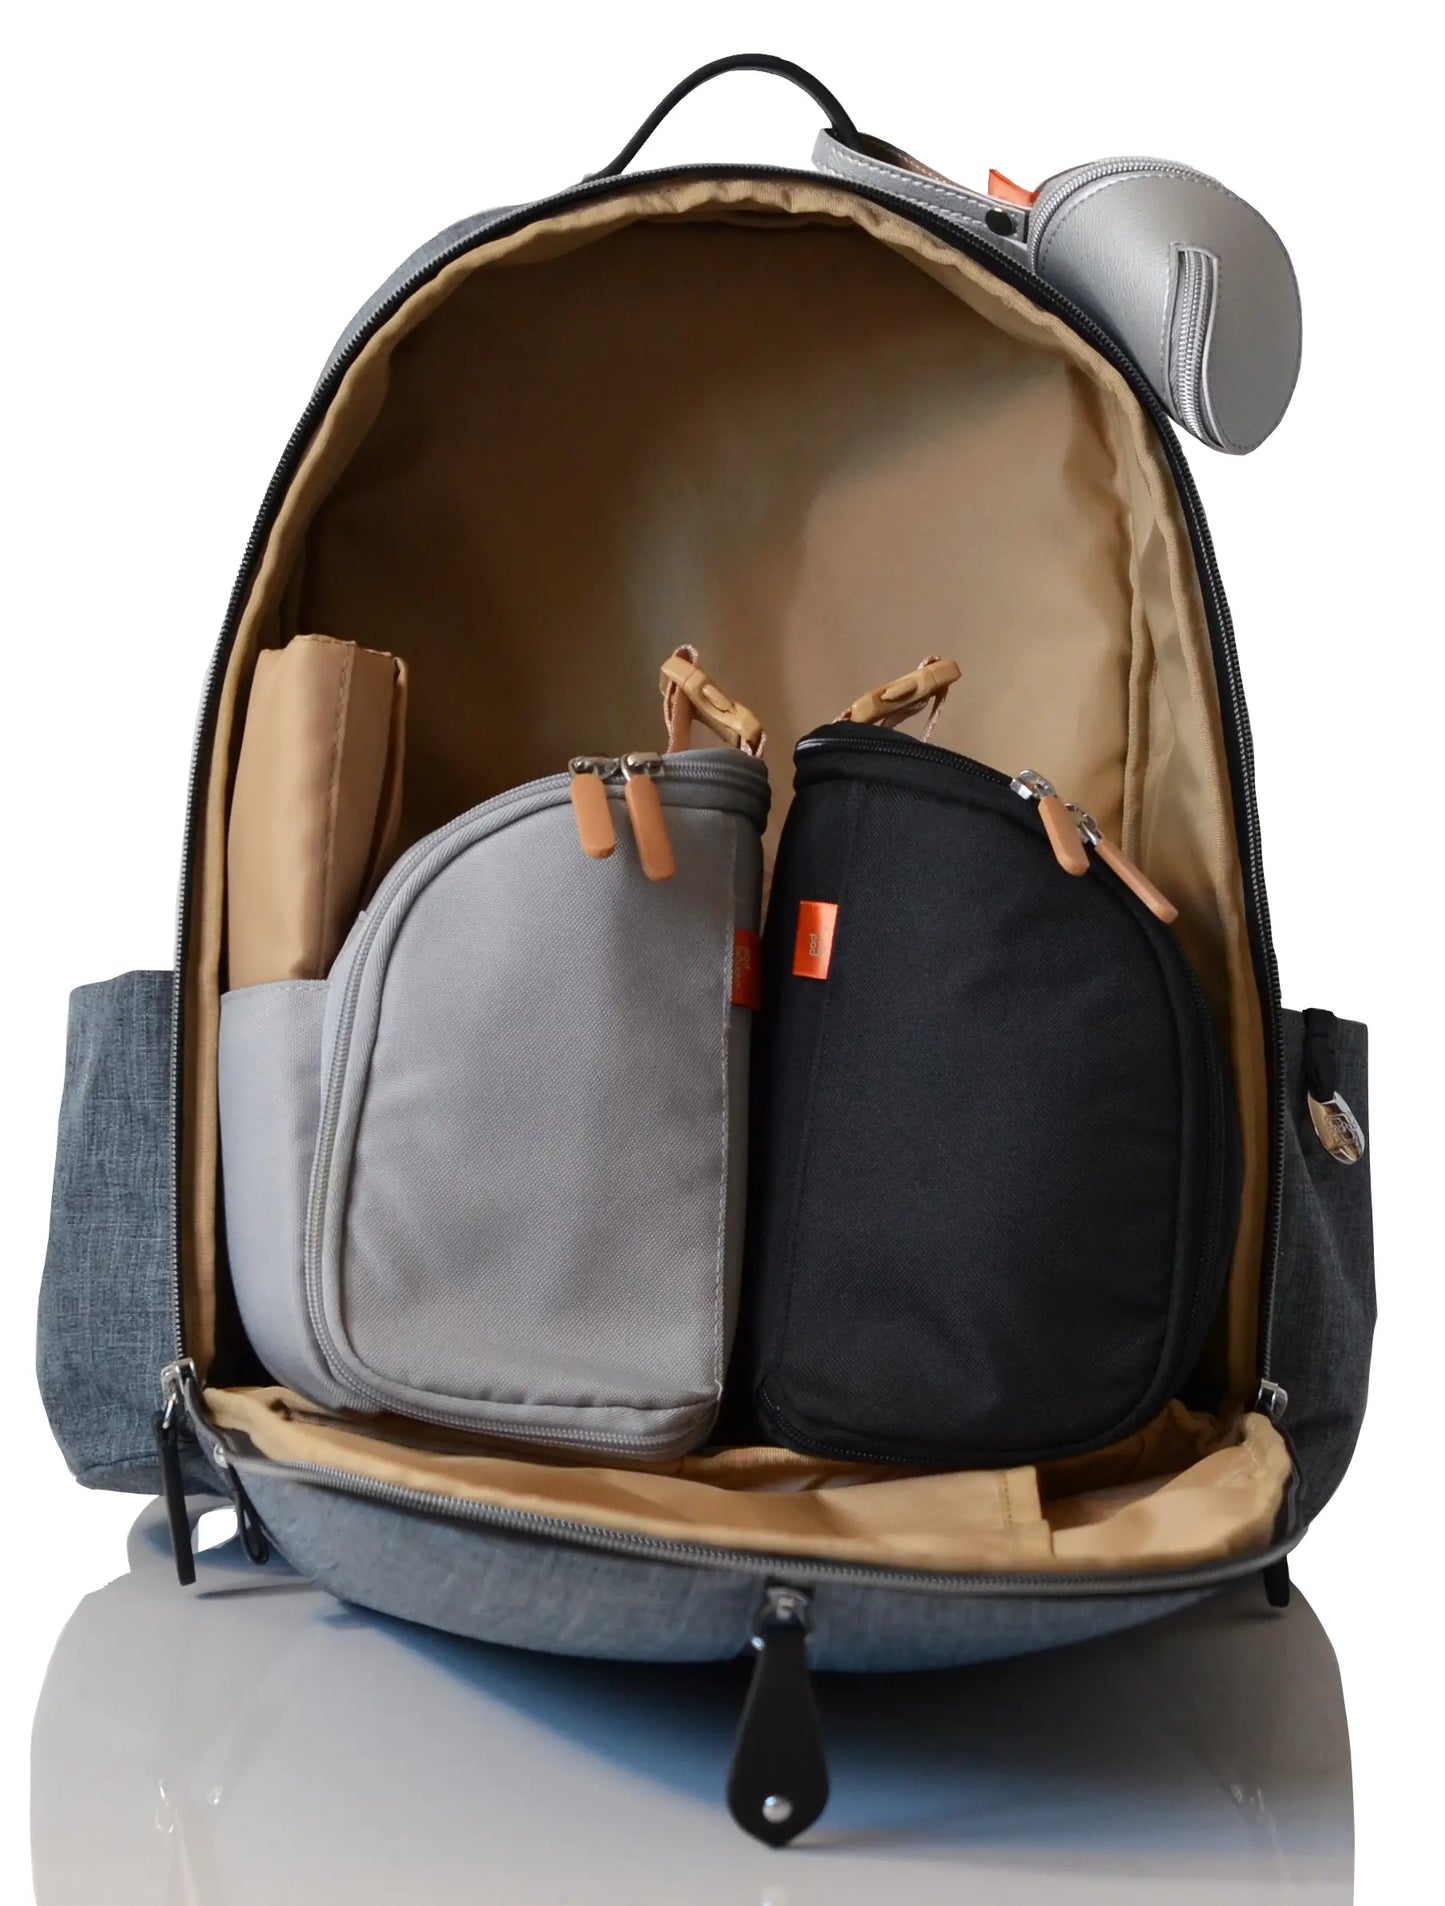 PacaPod Picos Changing Backpack